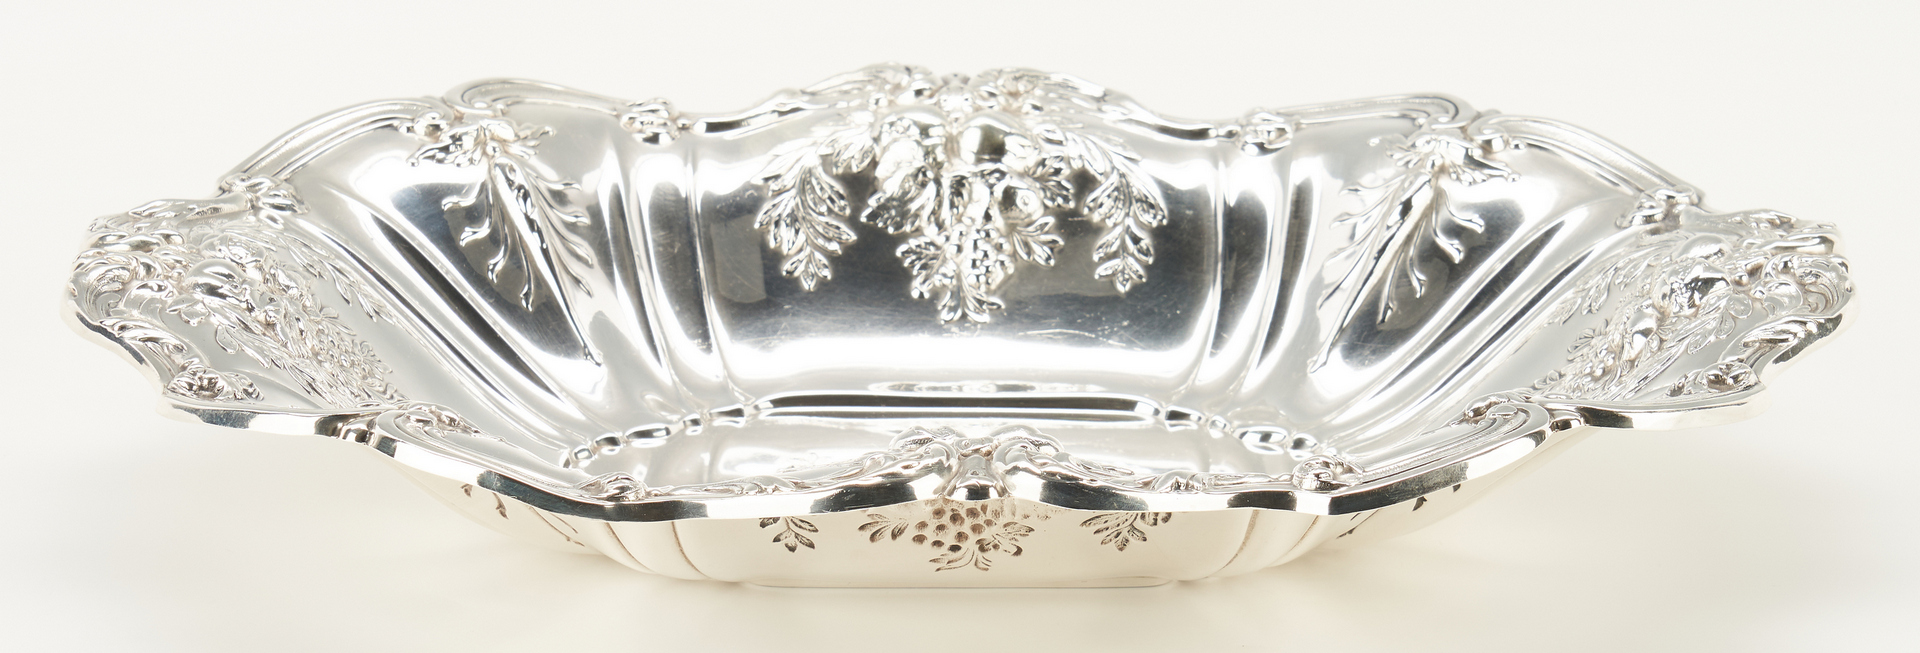 Lot 283: Reed & Barton Francis I Pattern Sterling Silver Serving Dish